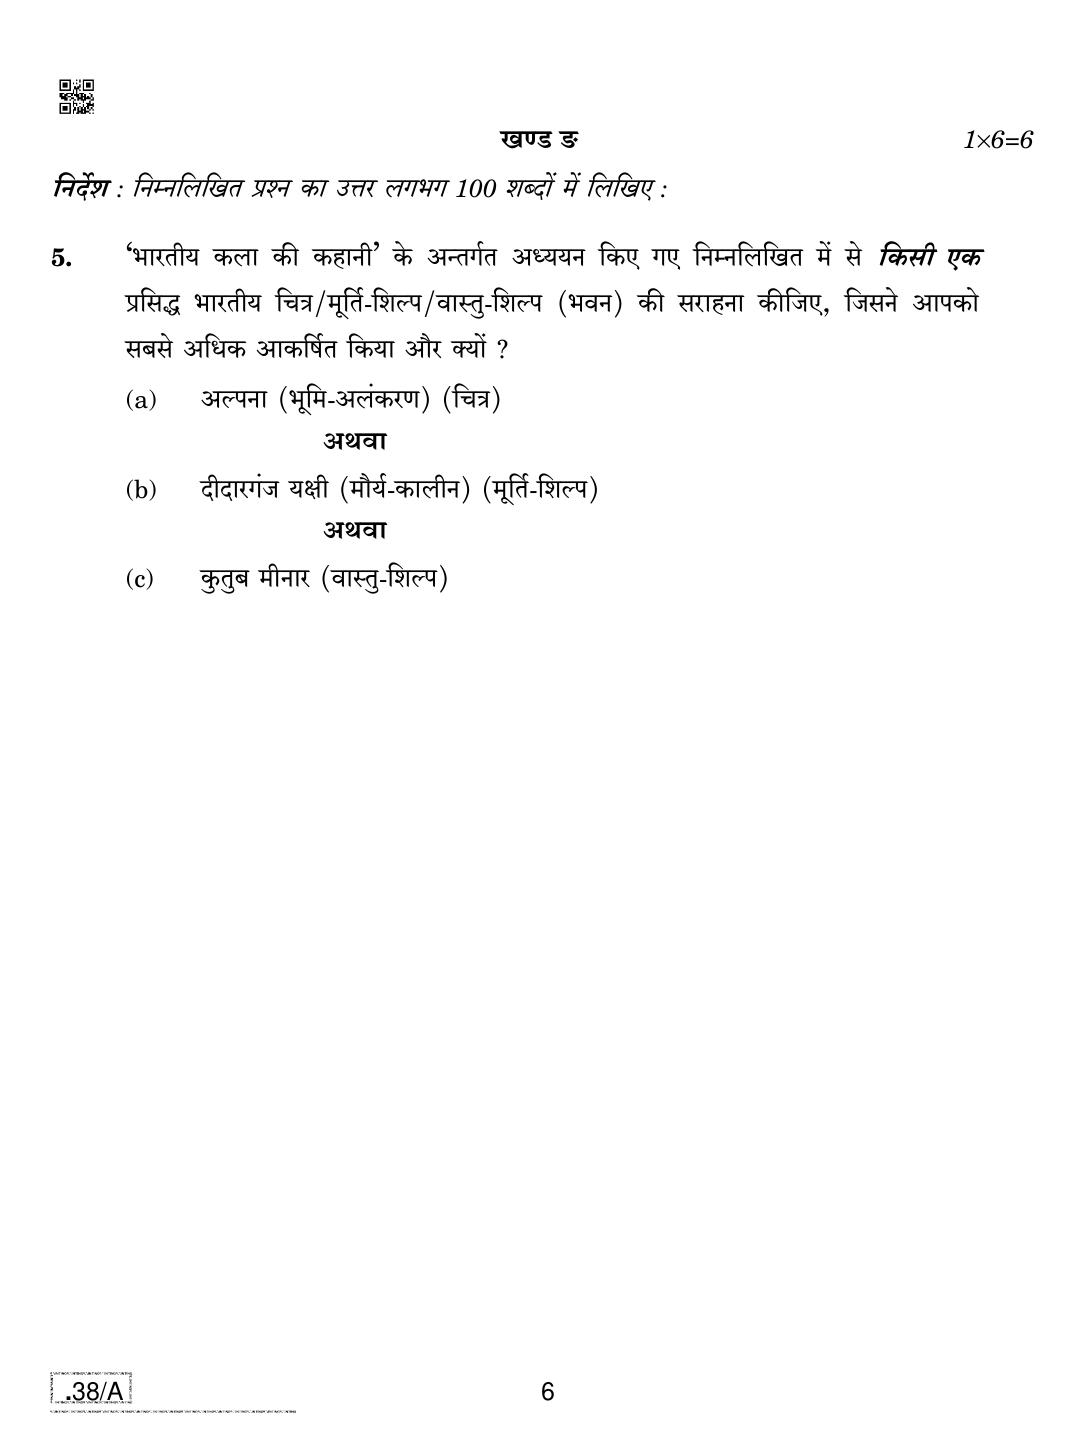 CBSE Class 10 Painting 2020 Compartment Question Paper - Page 6